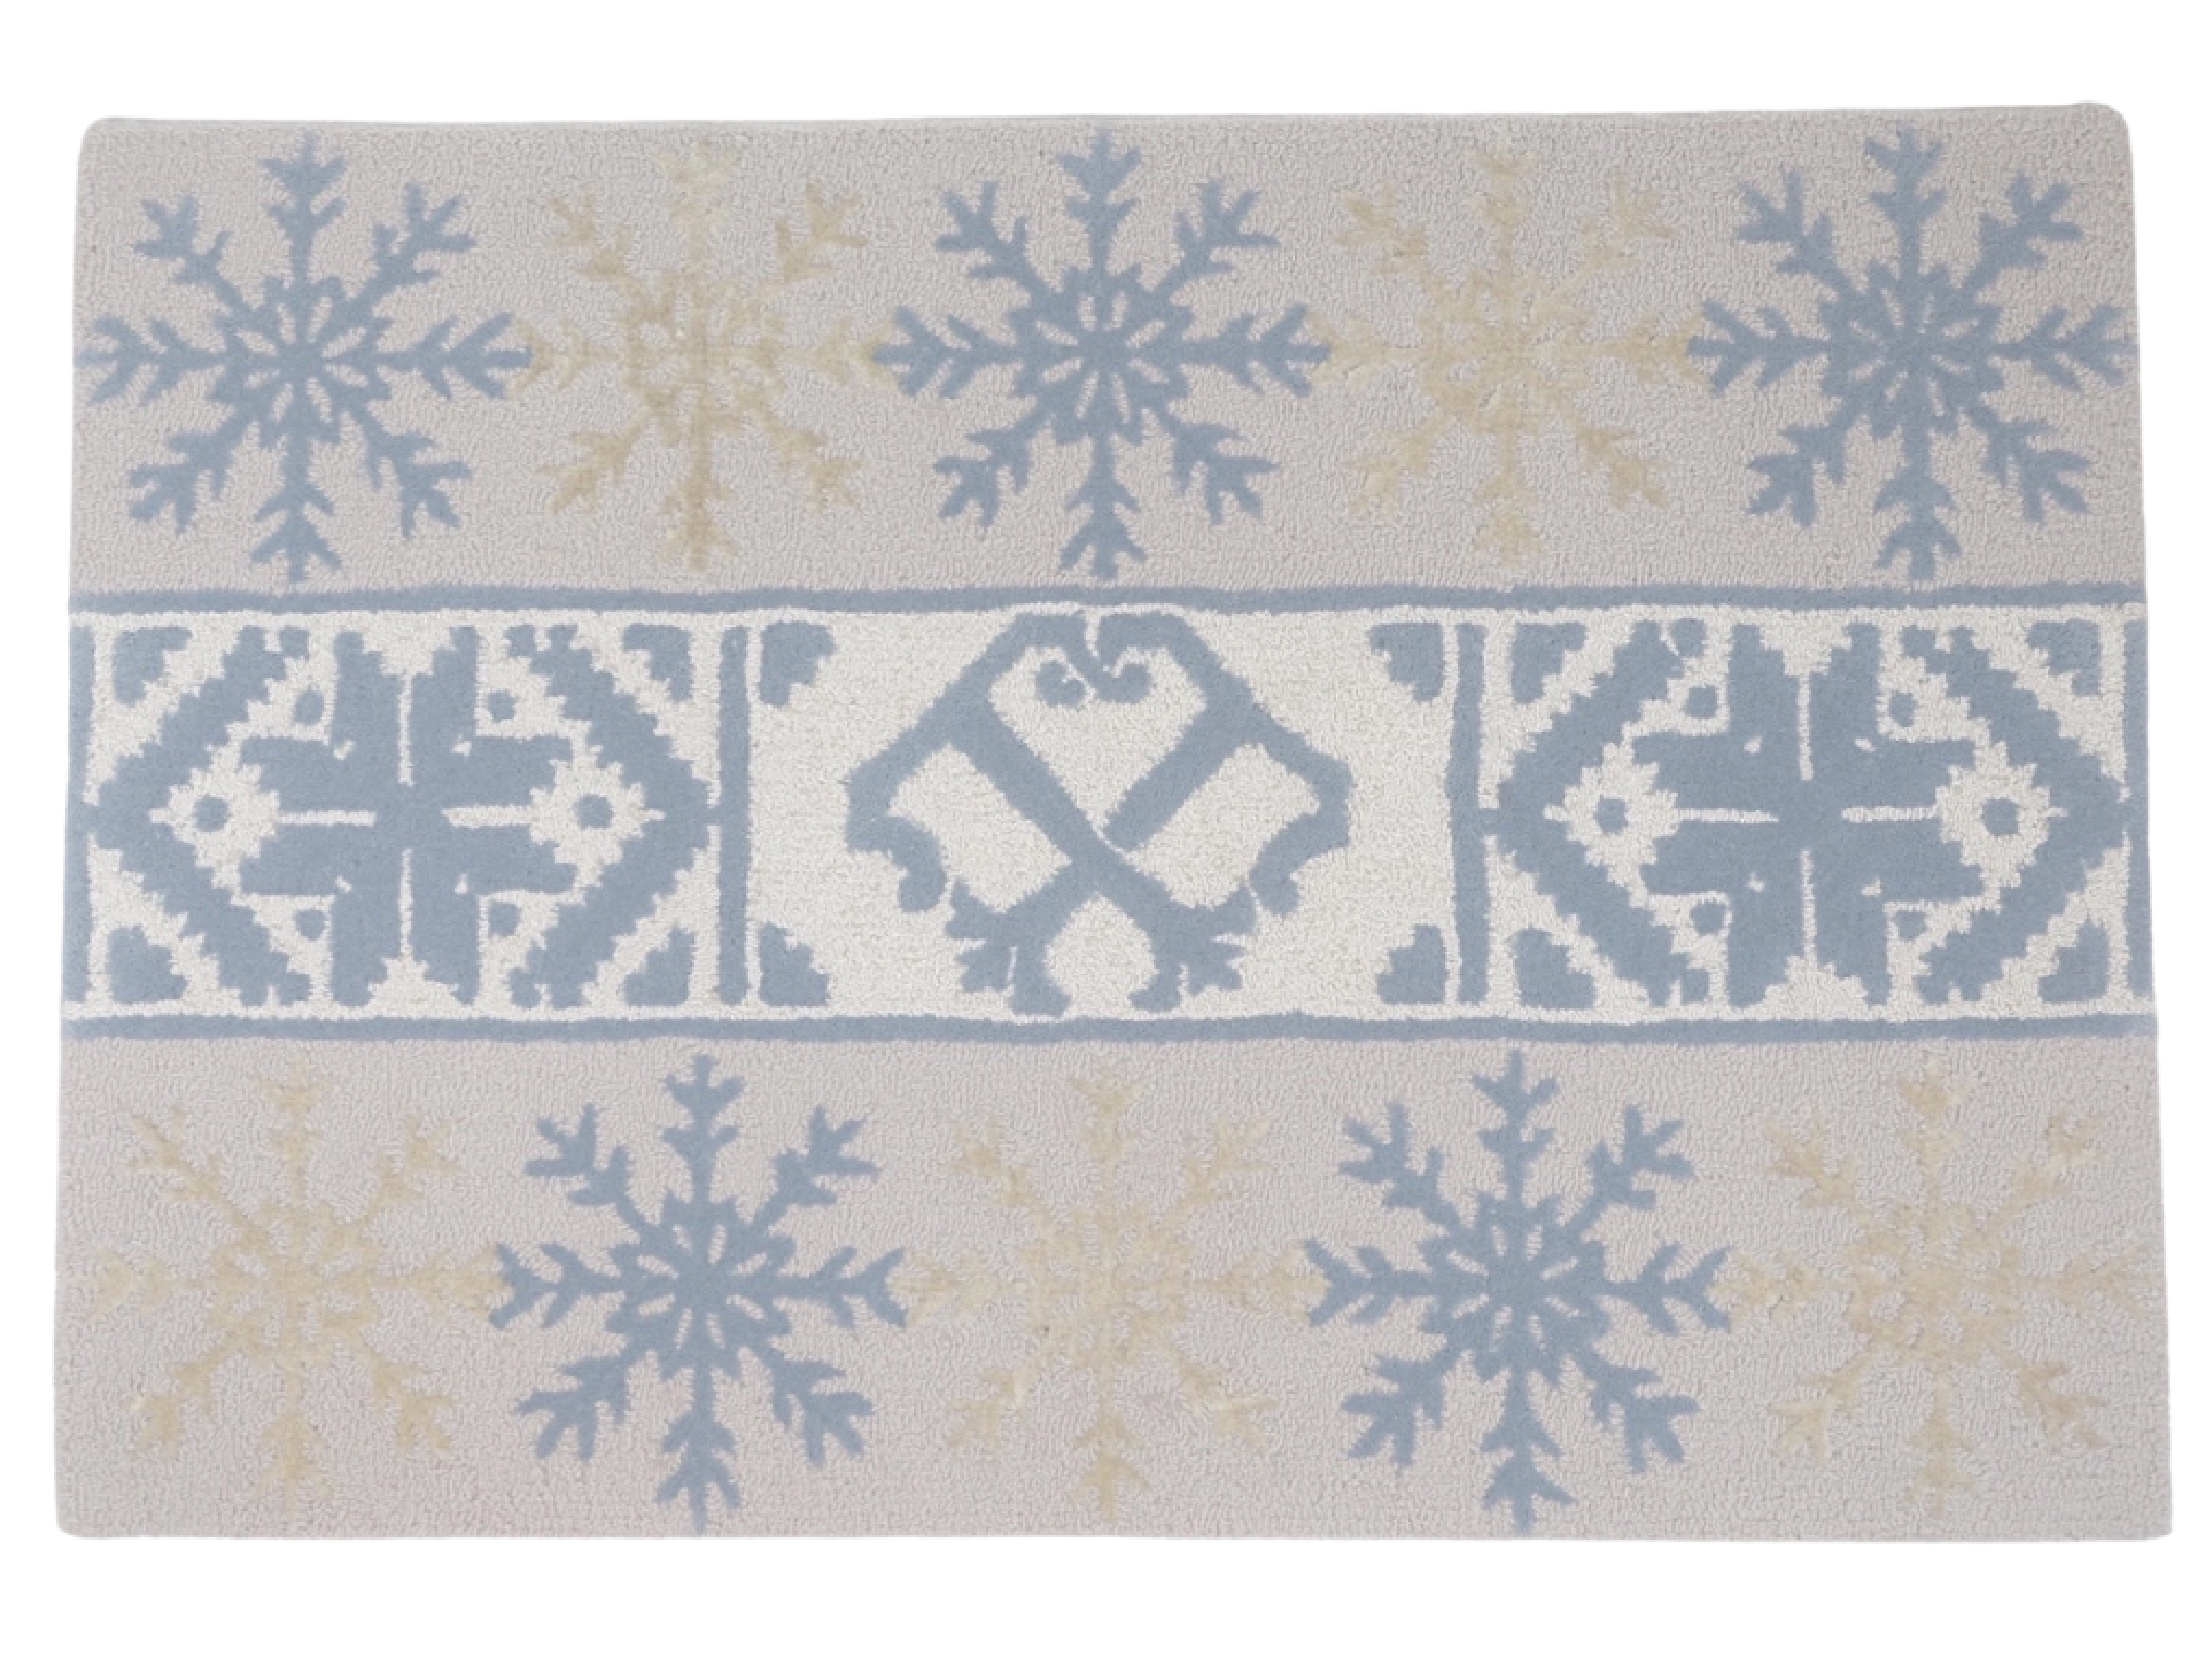 Fair Isles Blue and Winter White - Add Your Monogram